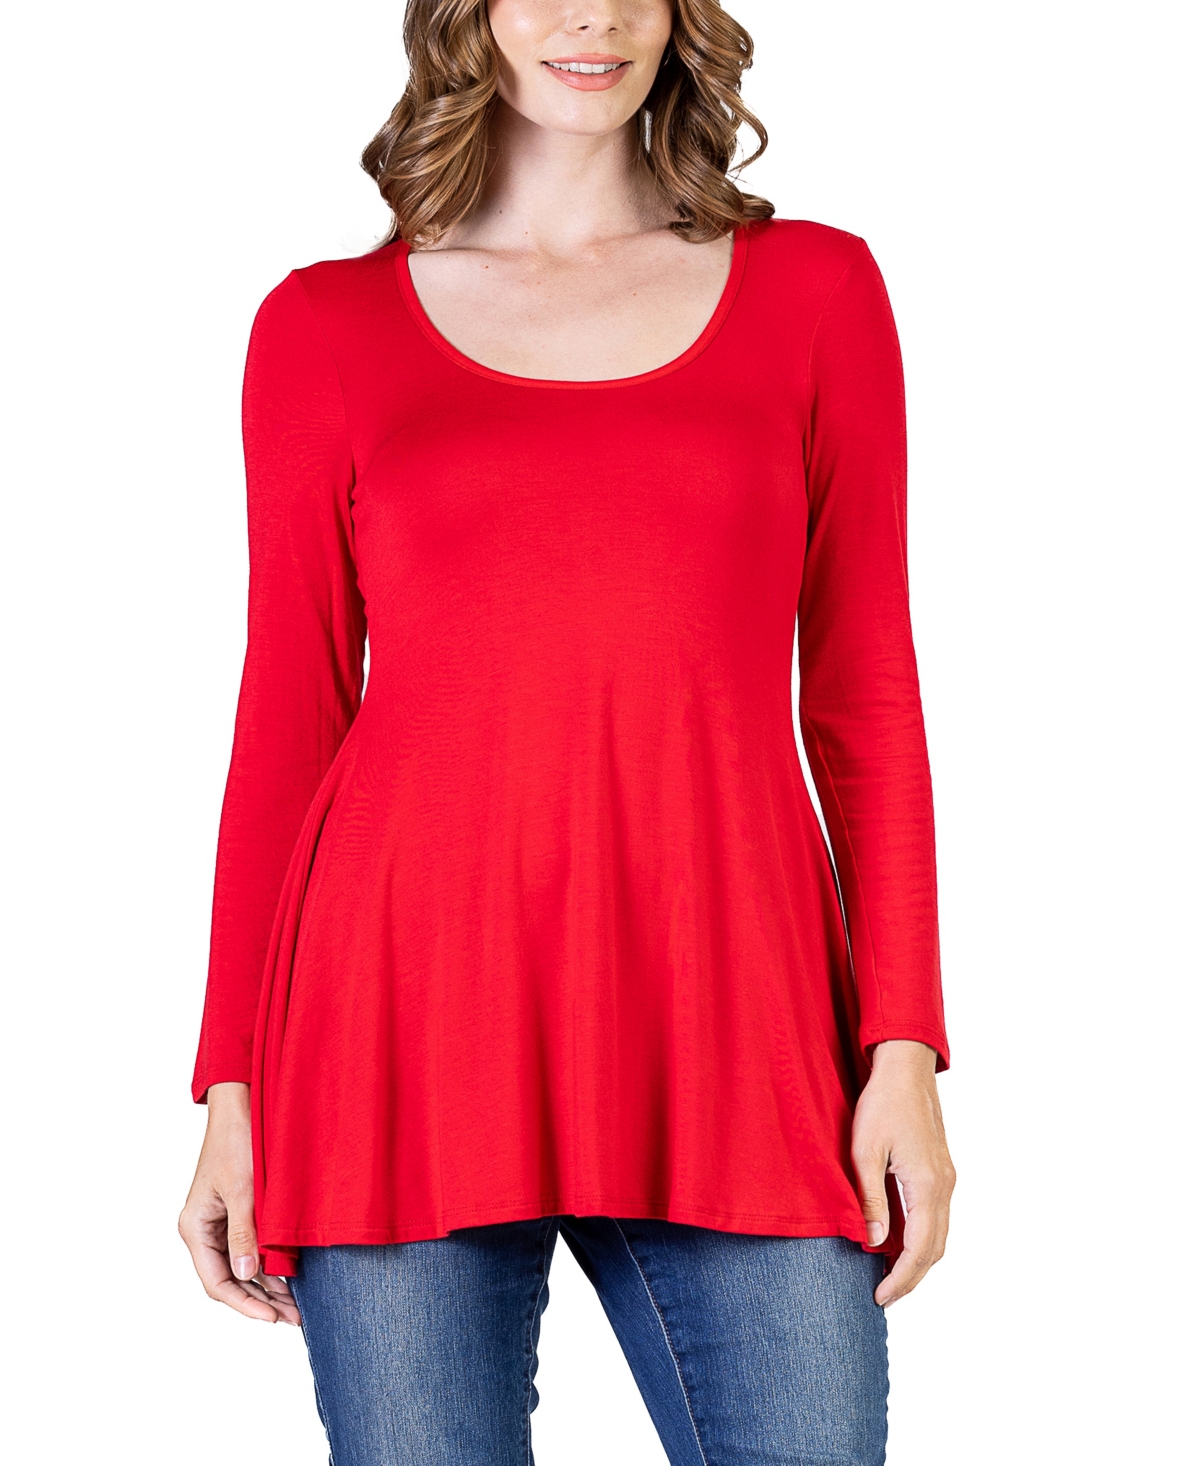 24seven Comfort Apparel Women's Long Sleeve Swing Style Flare Tunic Top In Red